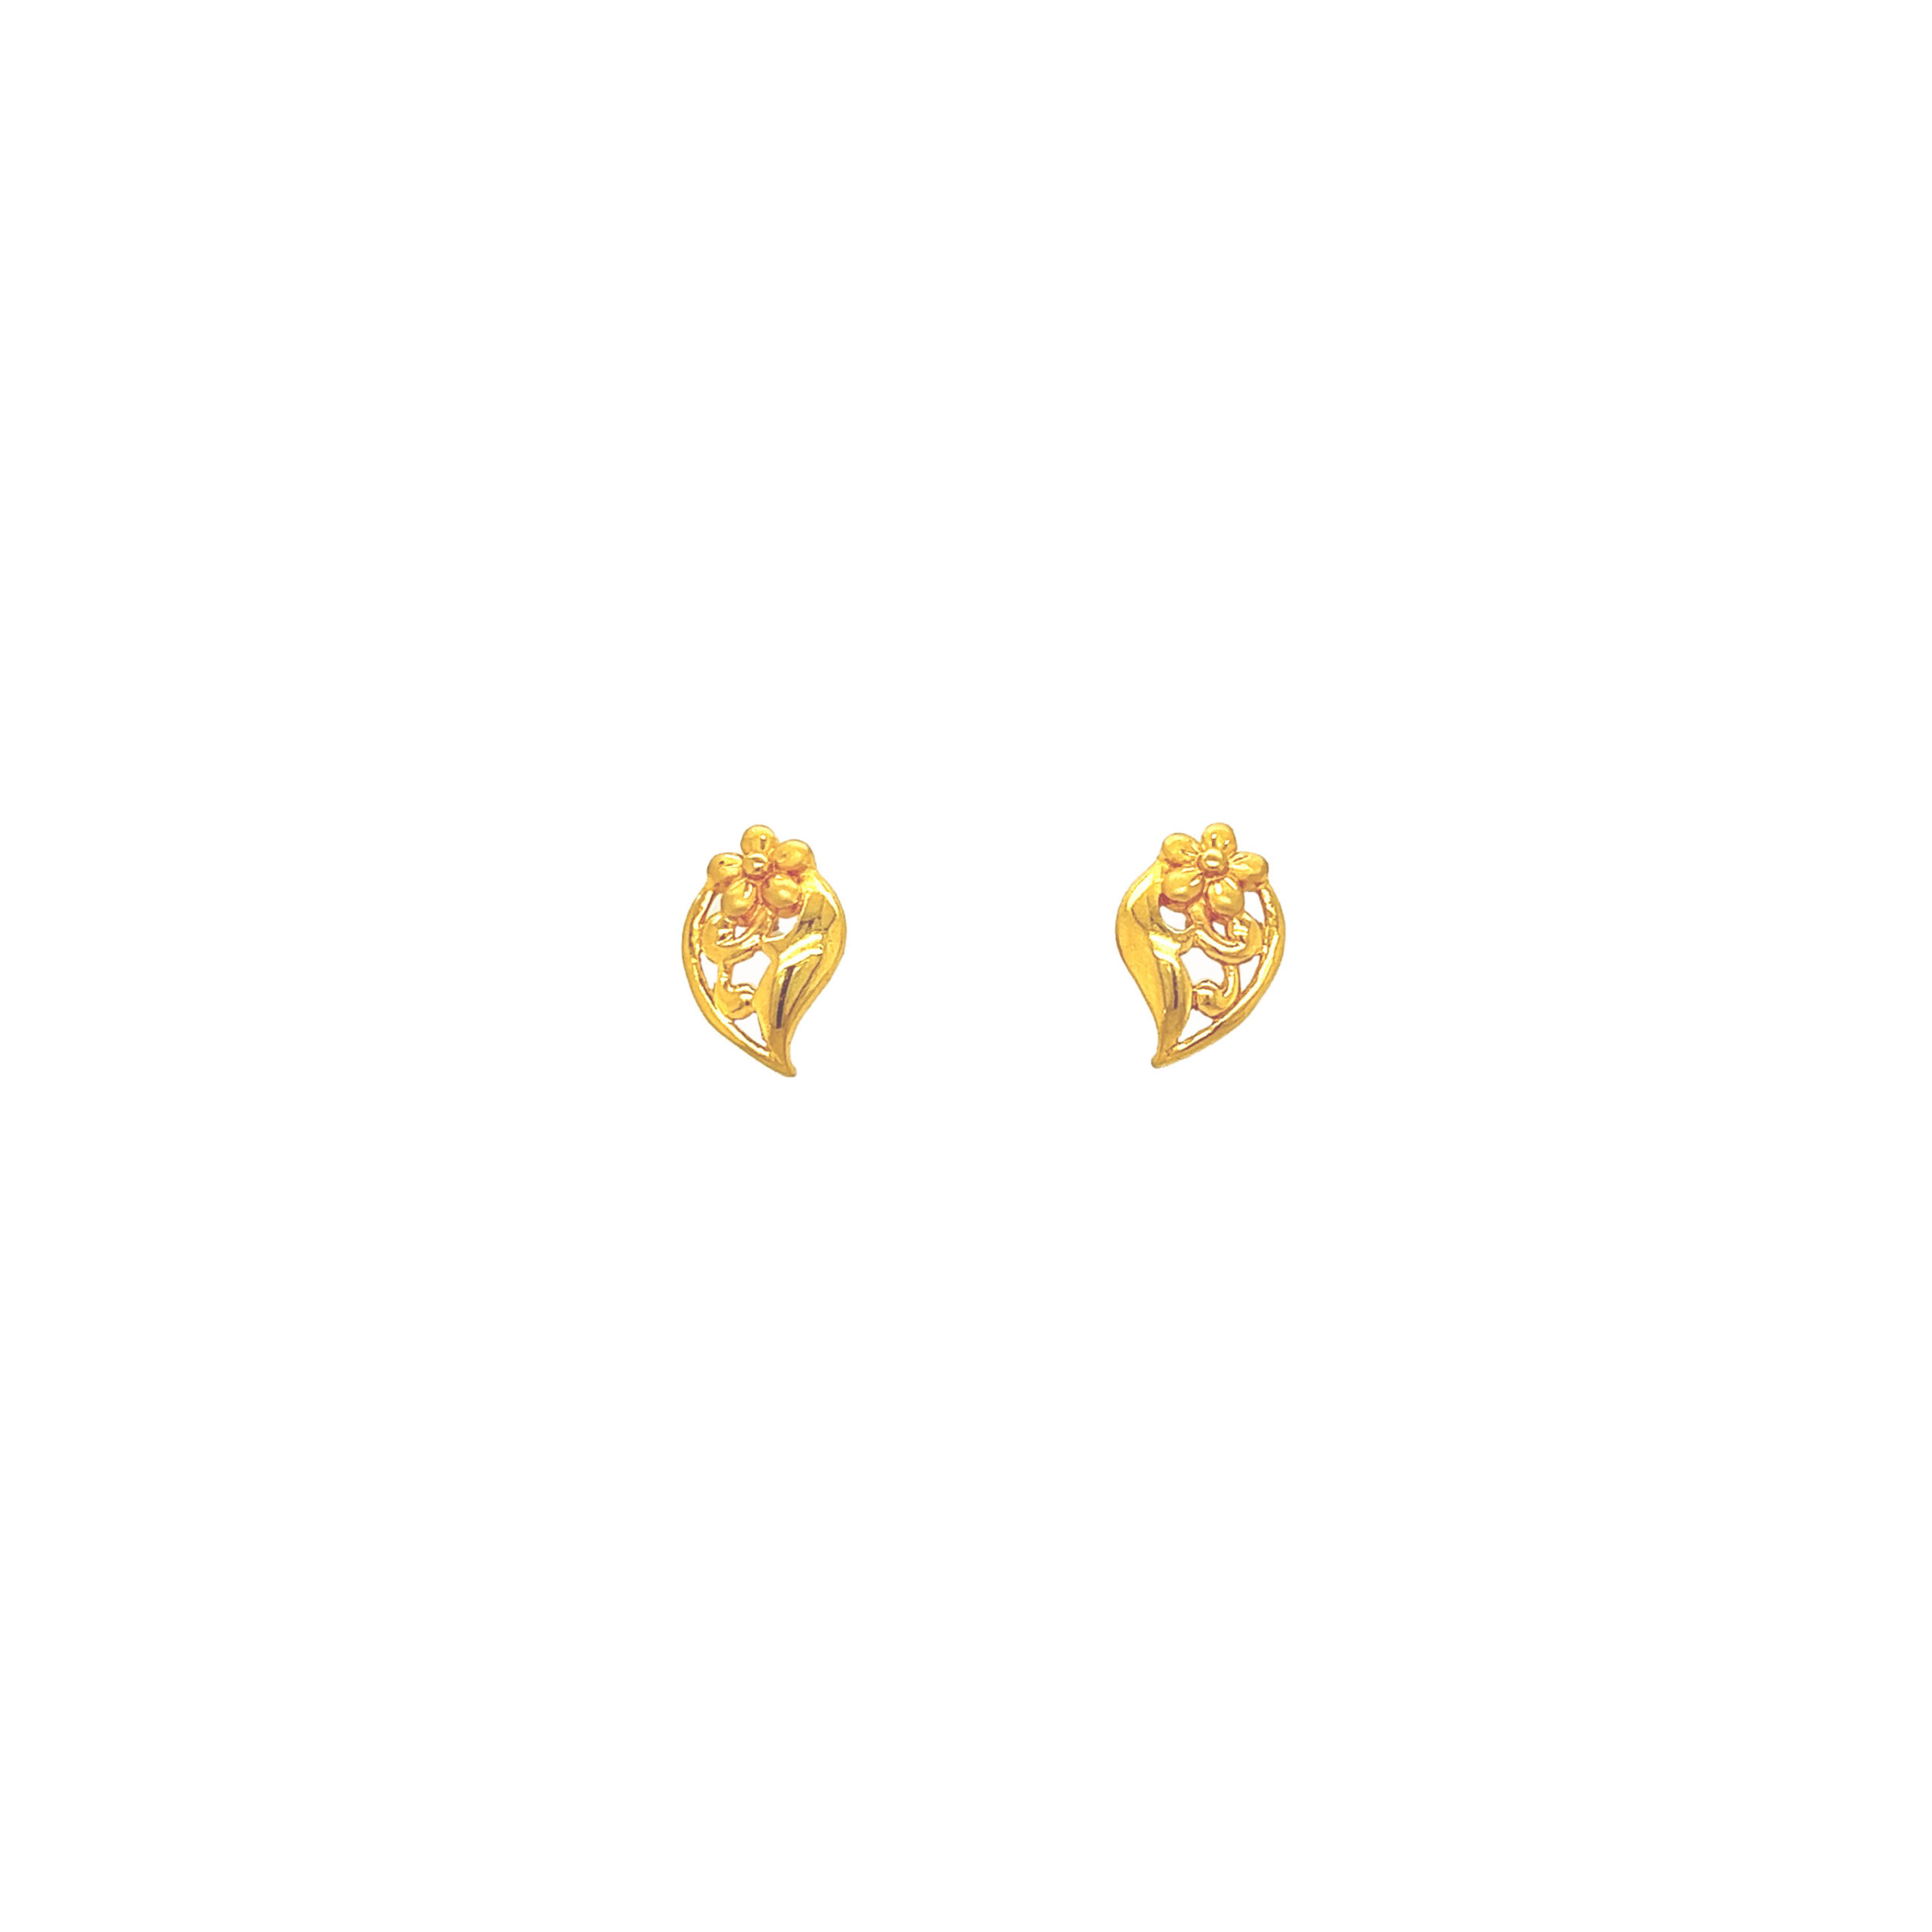 Gold Stud Earrings - Openwork Triangle with 24K Gold Plate